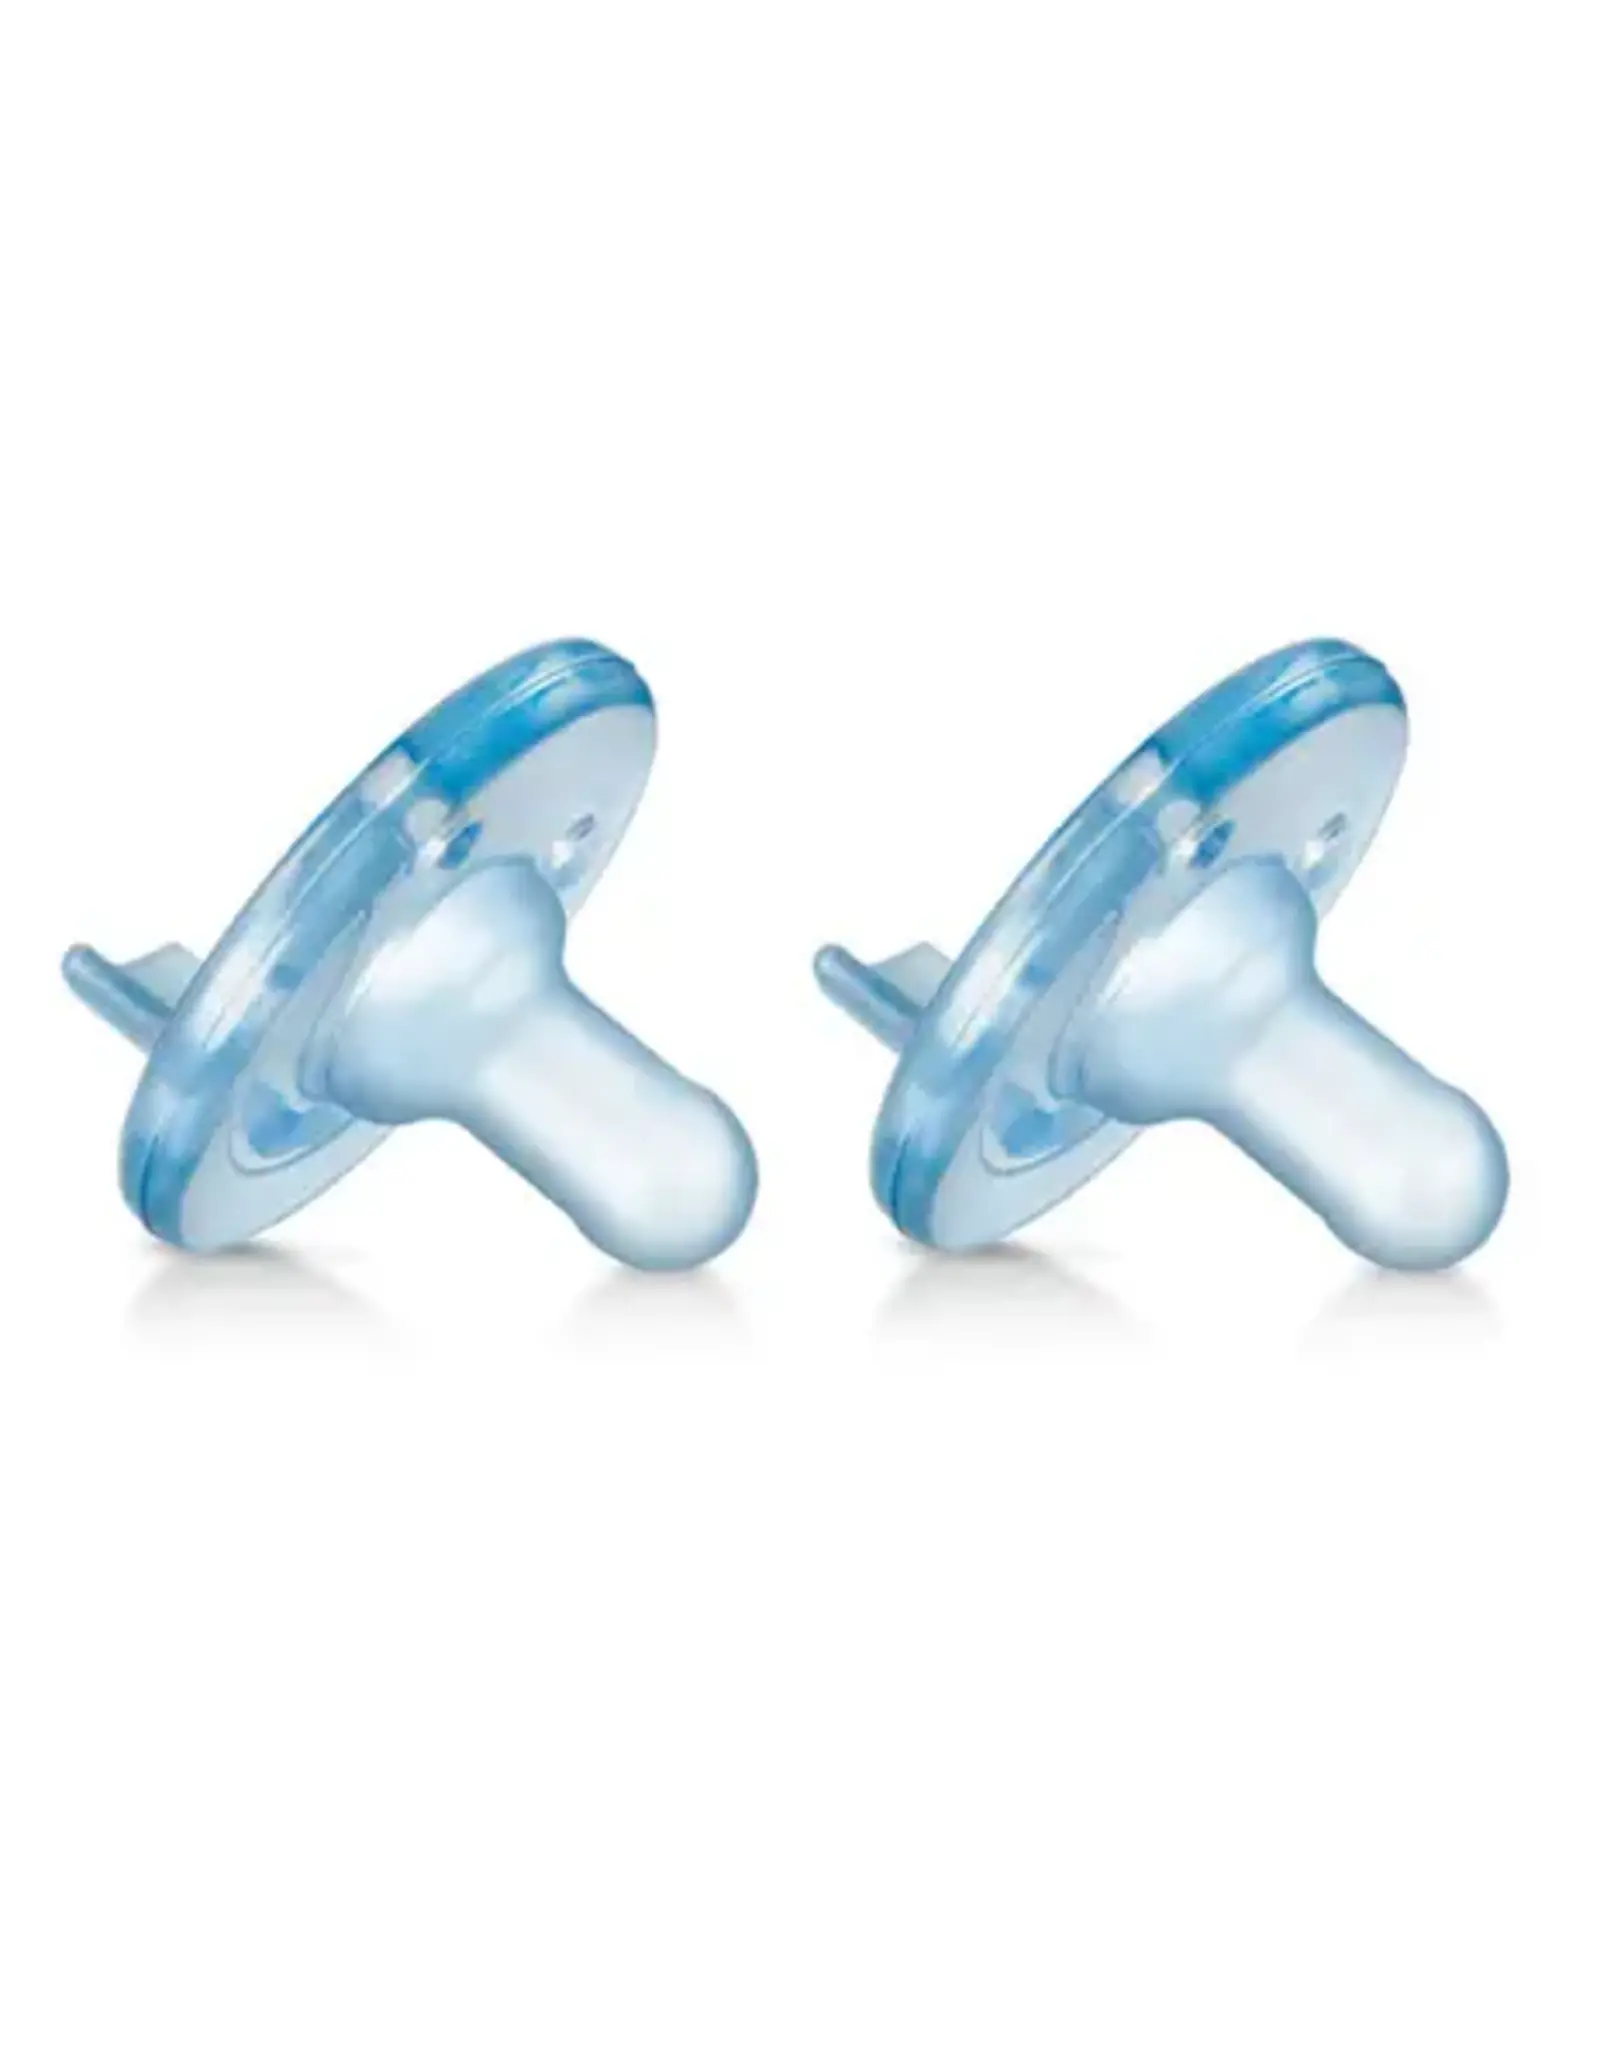 Philips AVENT Soothie Pacifier 0-3M 2 Pack Blue